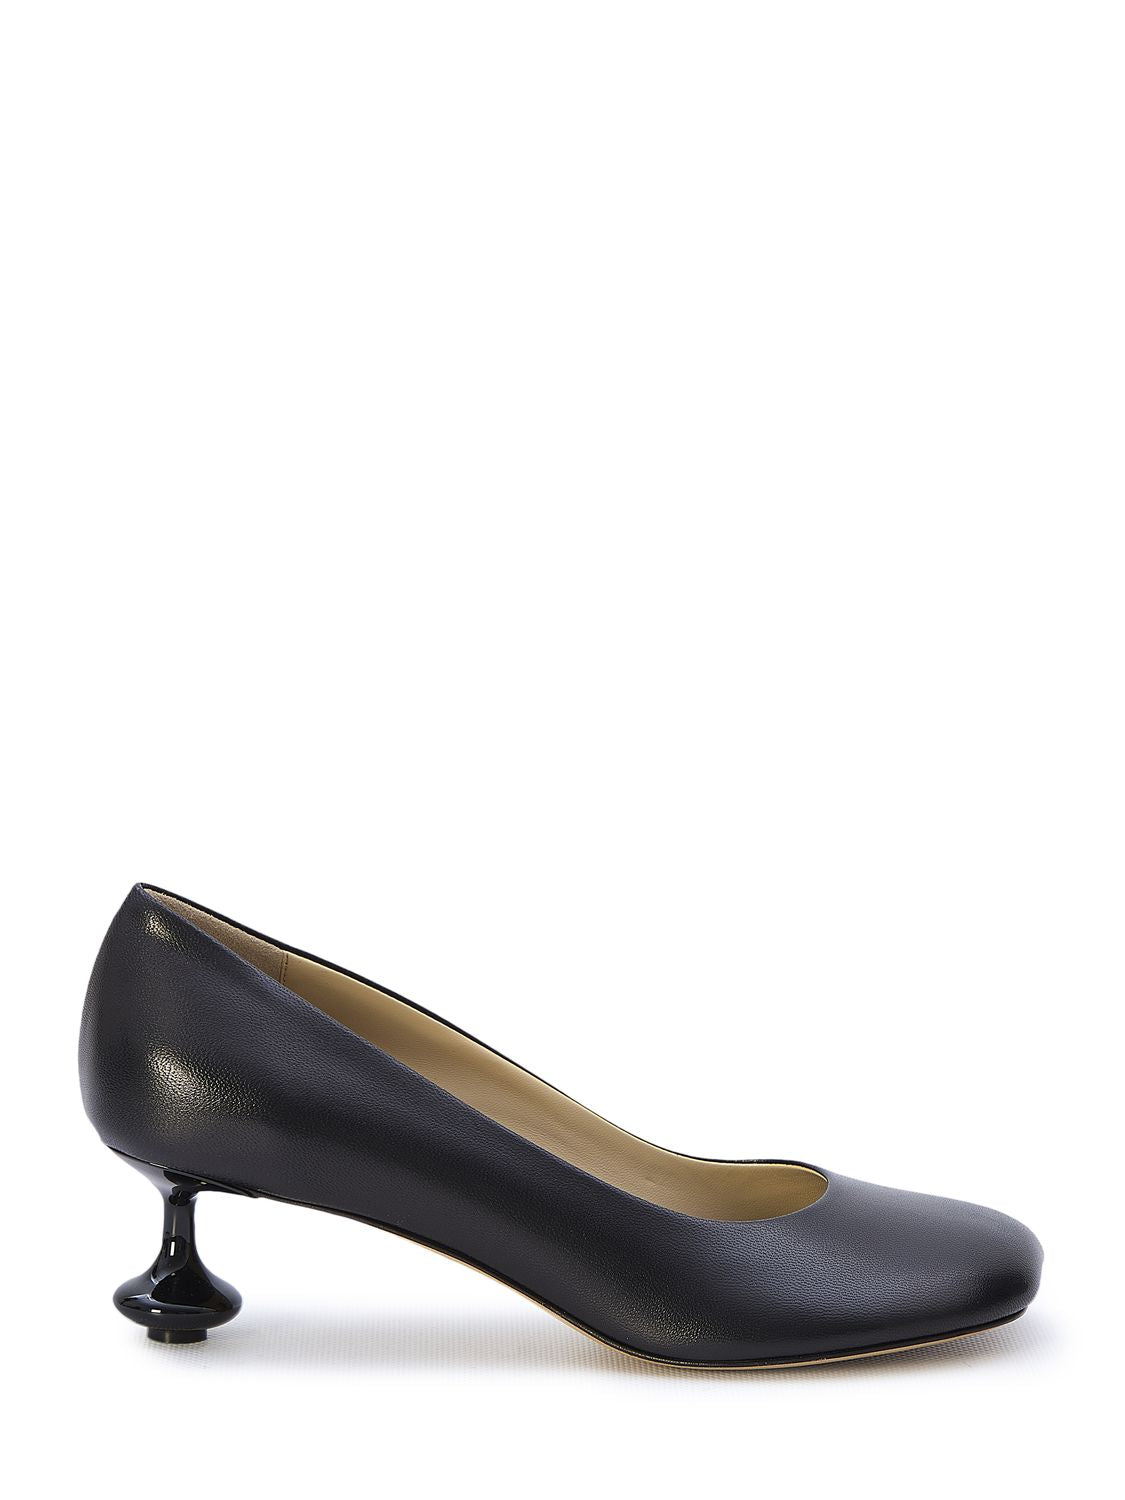 Black Petal-Toe Pumps with Lacquered Toy Heel